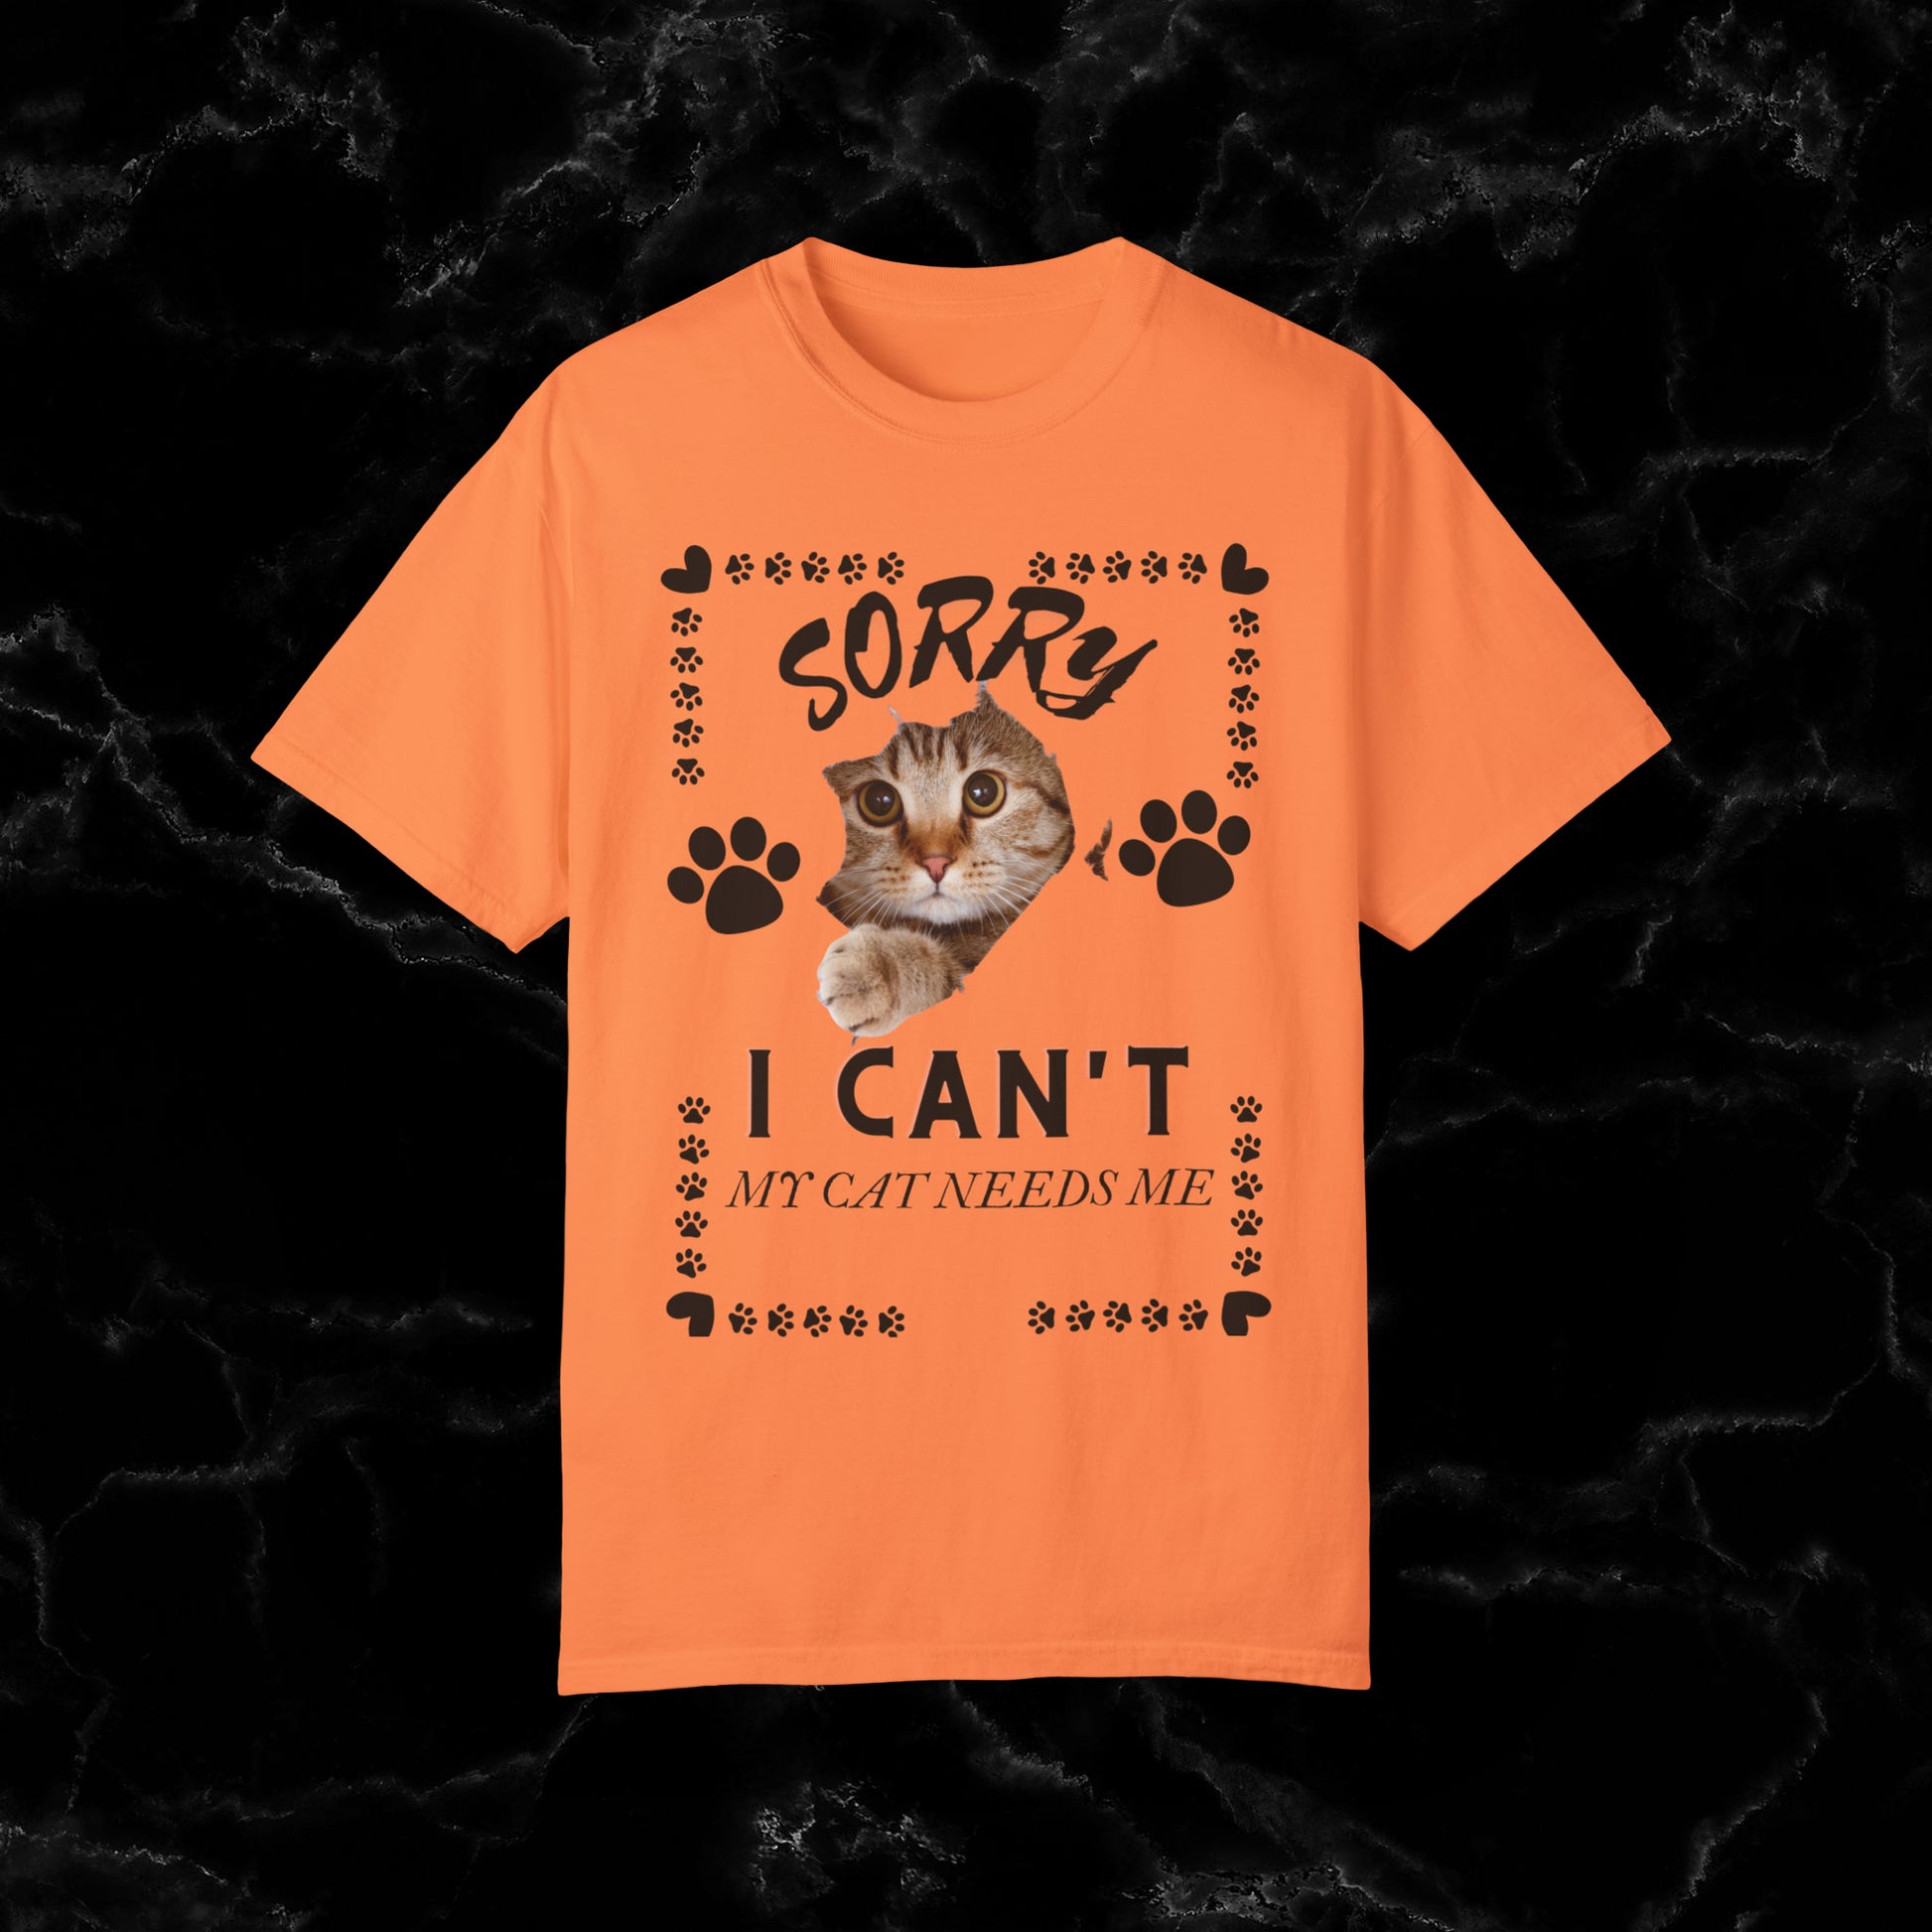 Sorry I Can't, My Cat Needs Me T-Shirt - Perfect Gift for Cat Moms and Animal Lovers T-Shirt Melon S 